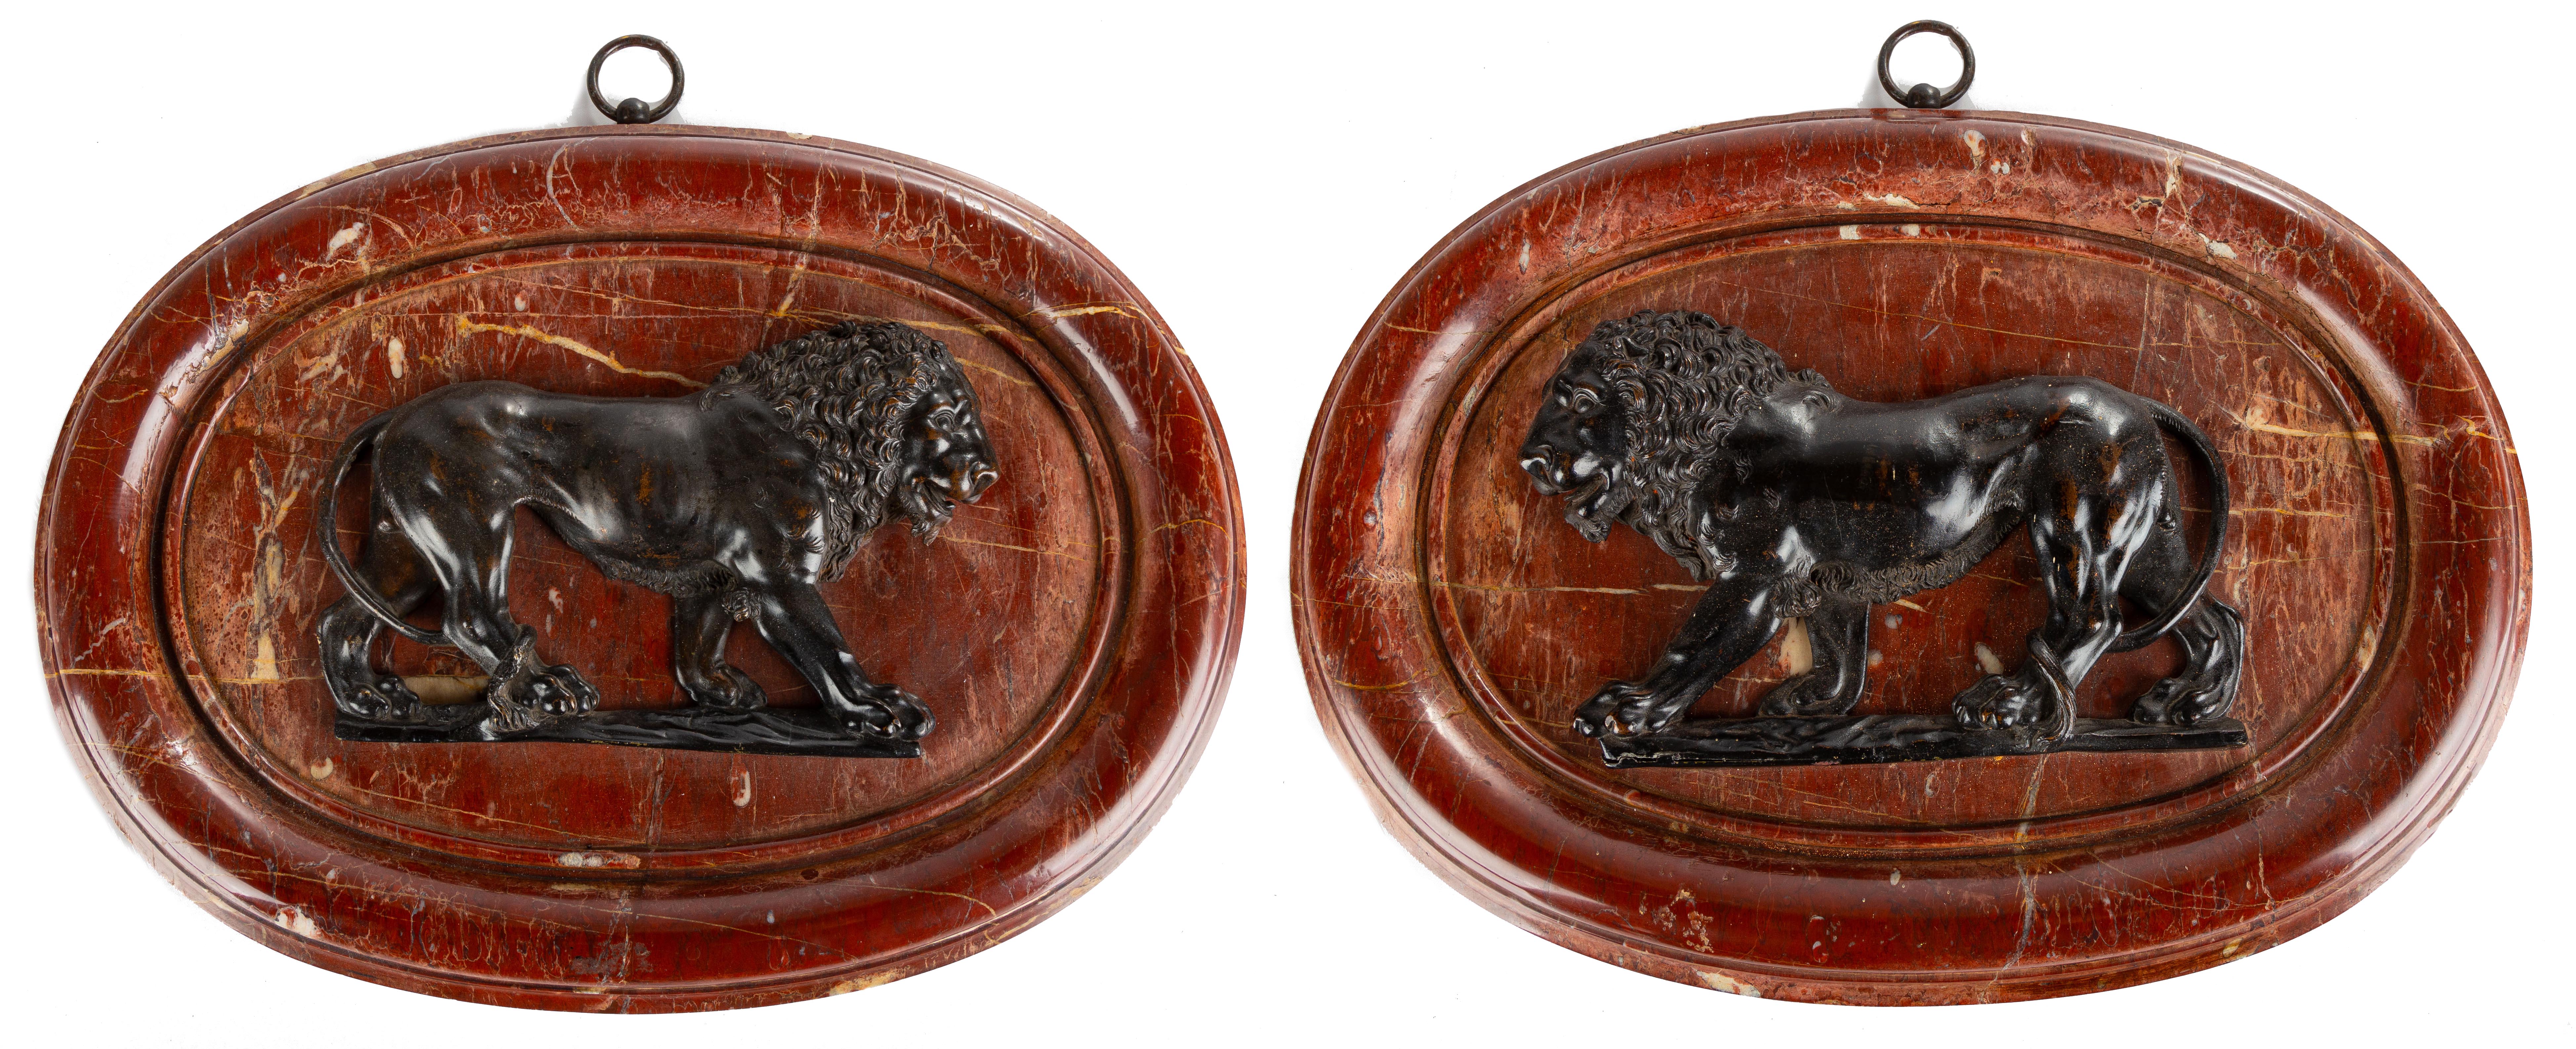 PAIR OF EARLY BRONZE MOUNTED LIONS 3c7f30